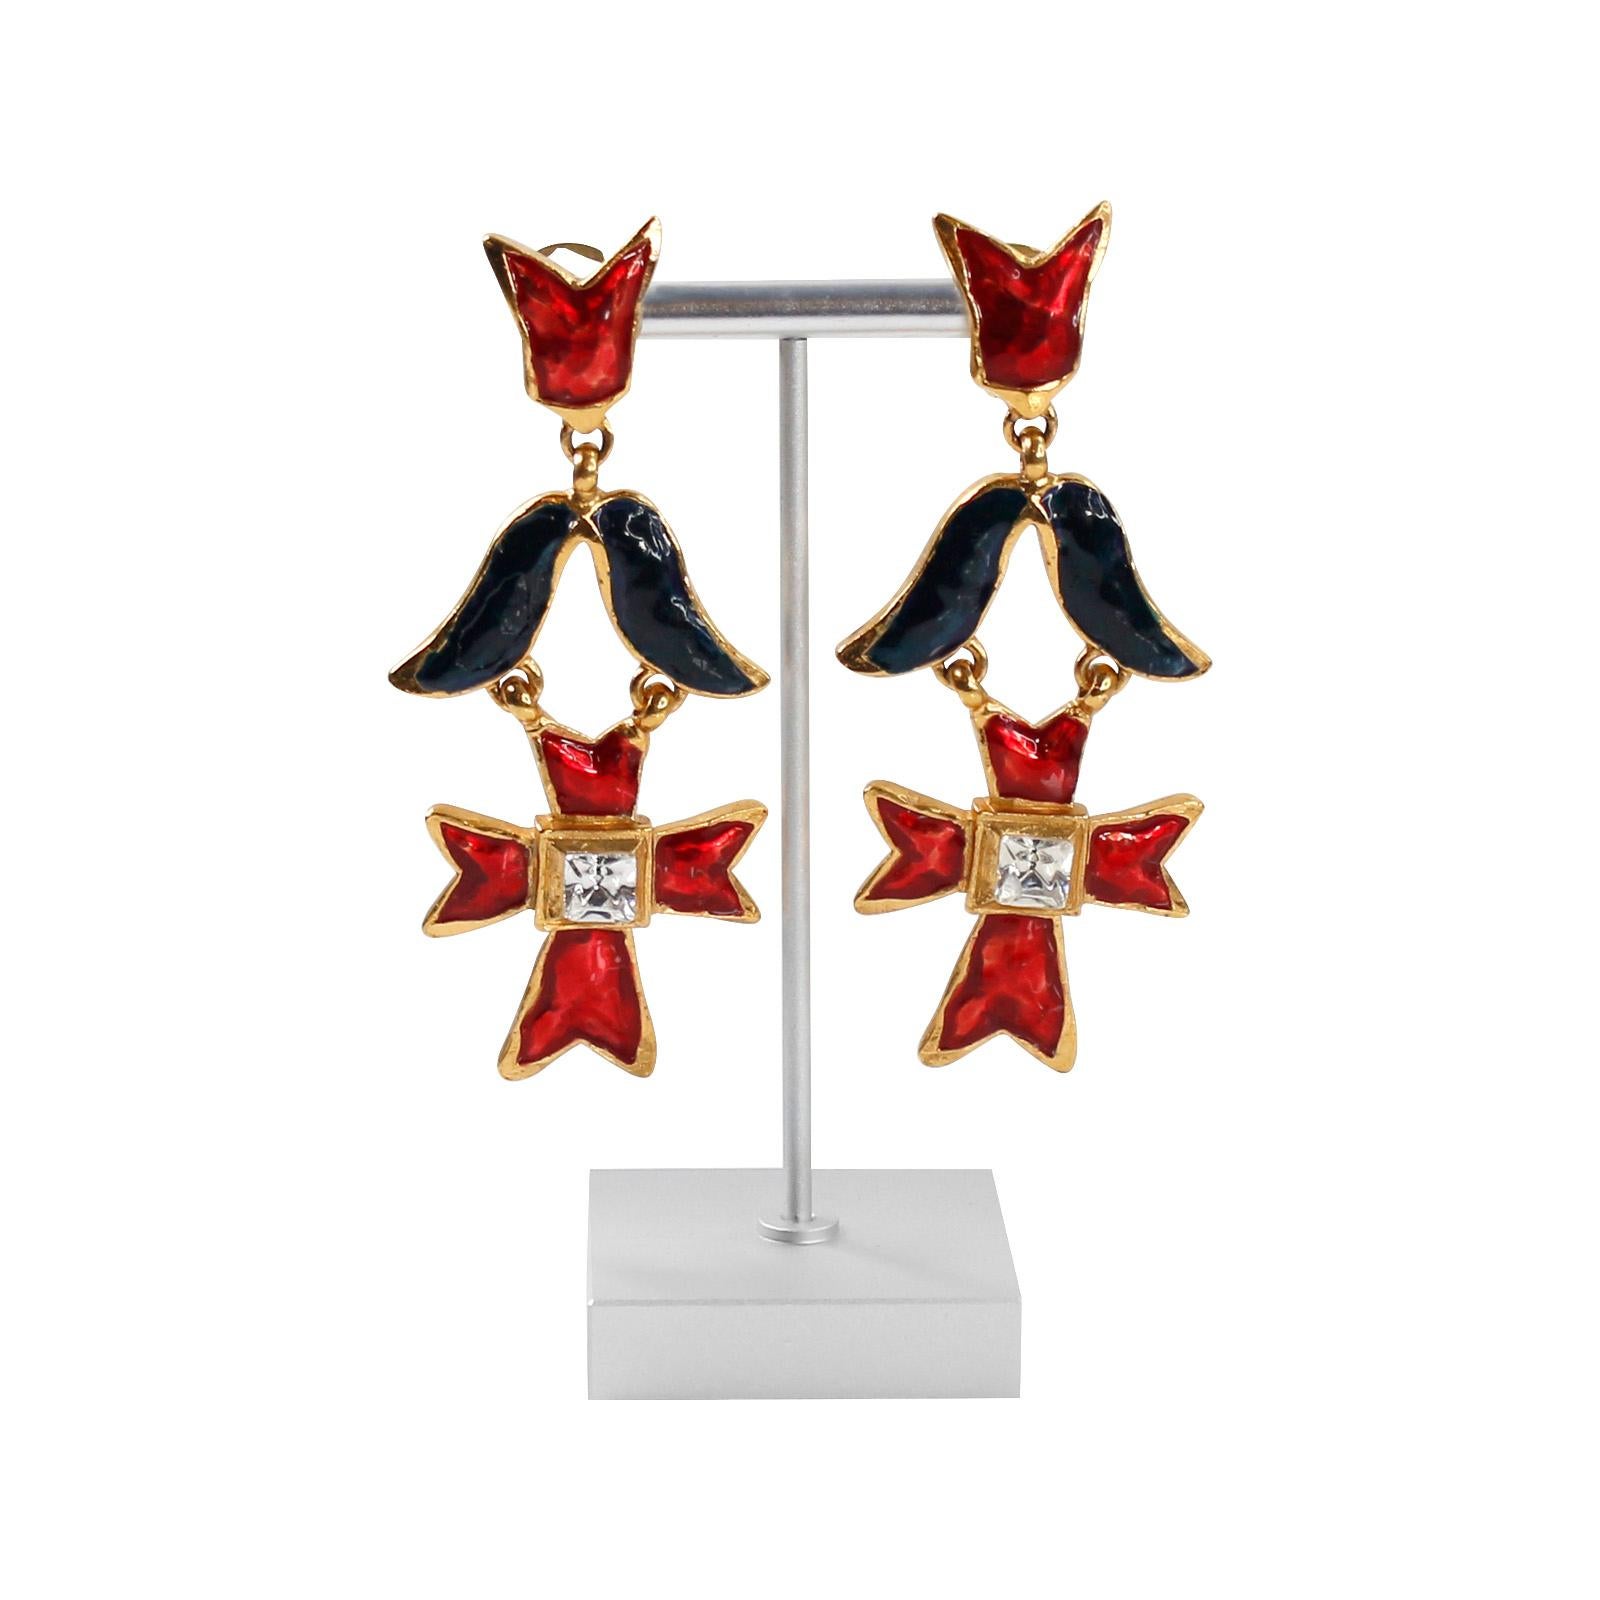 Artist Vintage Christian Lacroix Gold Red, Blue Crystal Earrings Circa 1990s For Sale